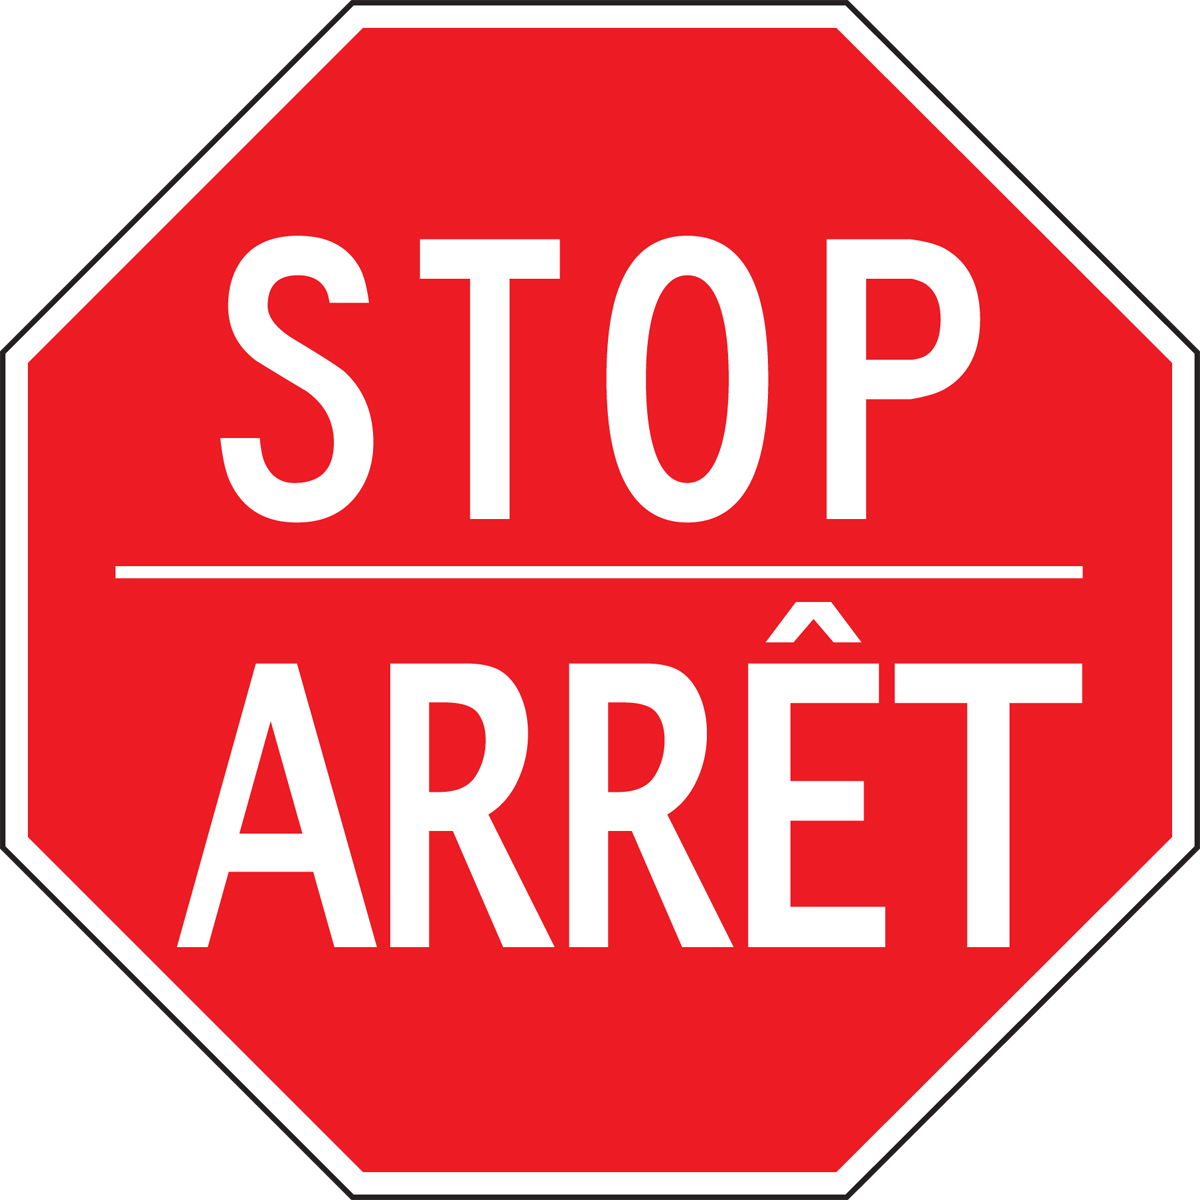 Bilingual English and French stop sign